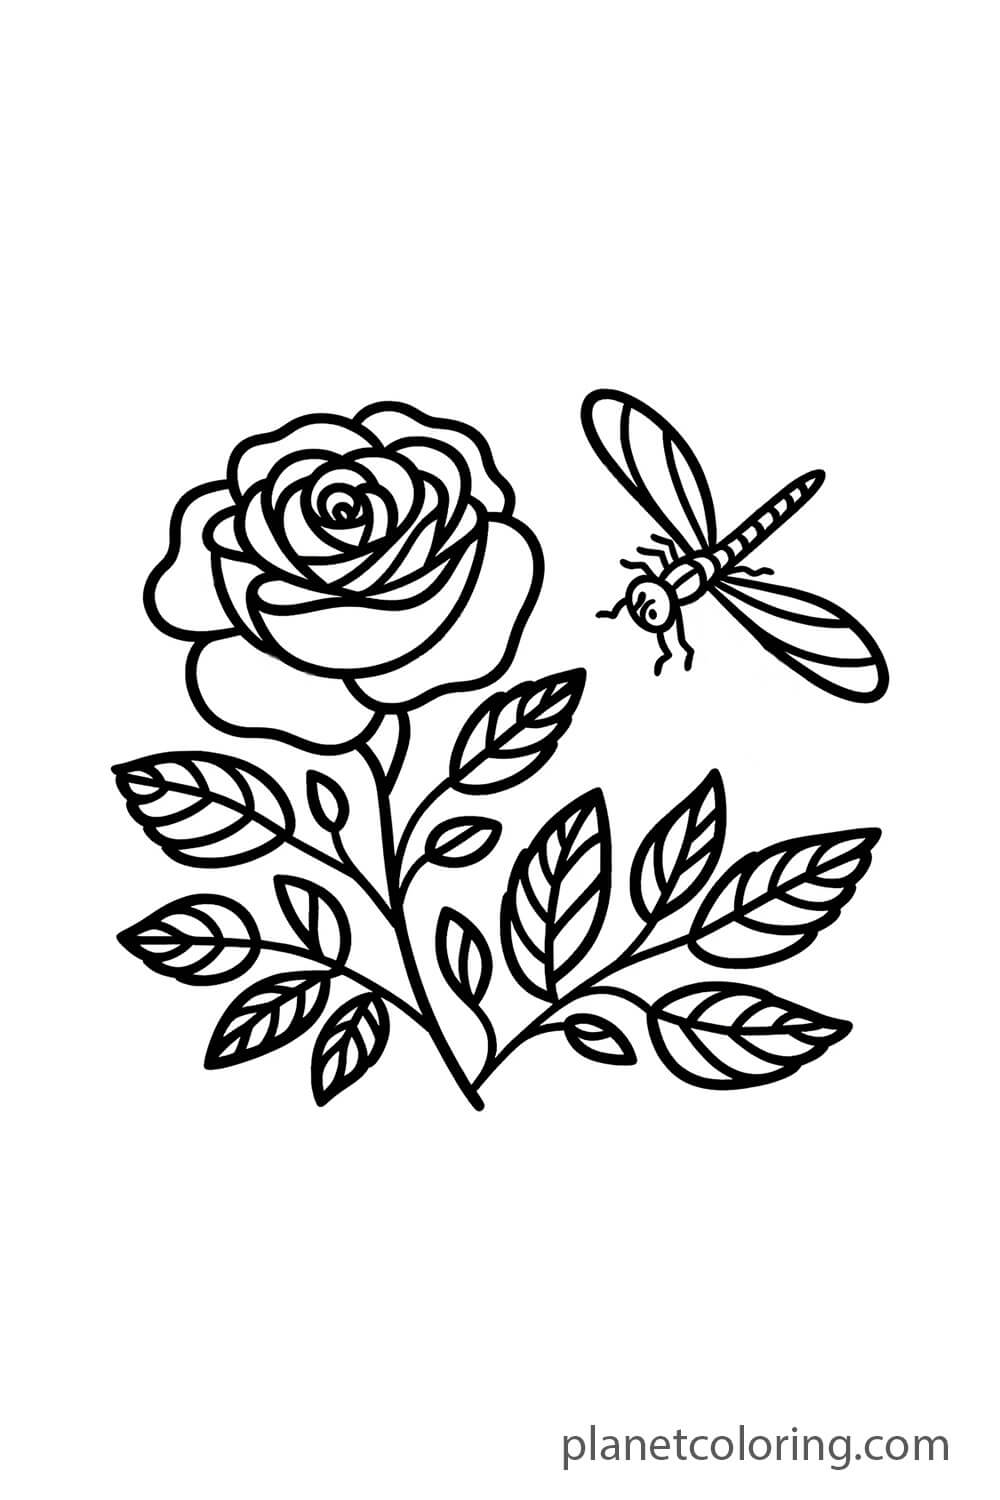 rose and dragonfly